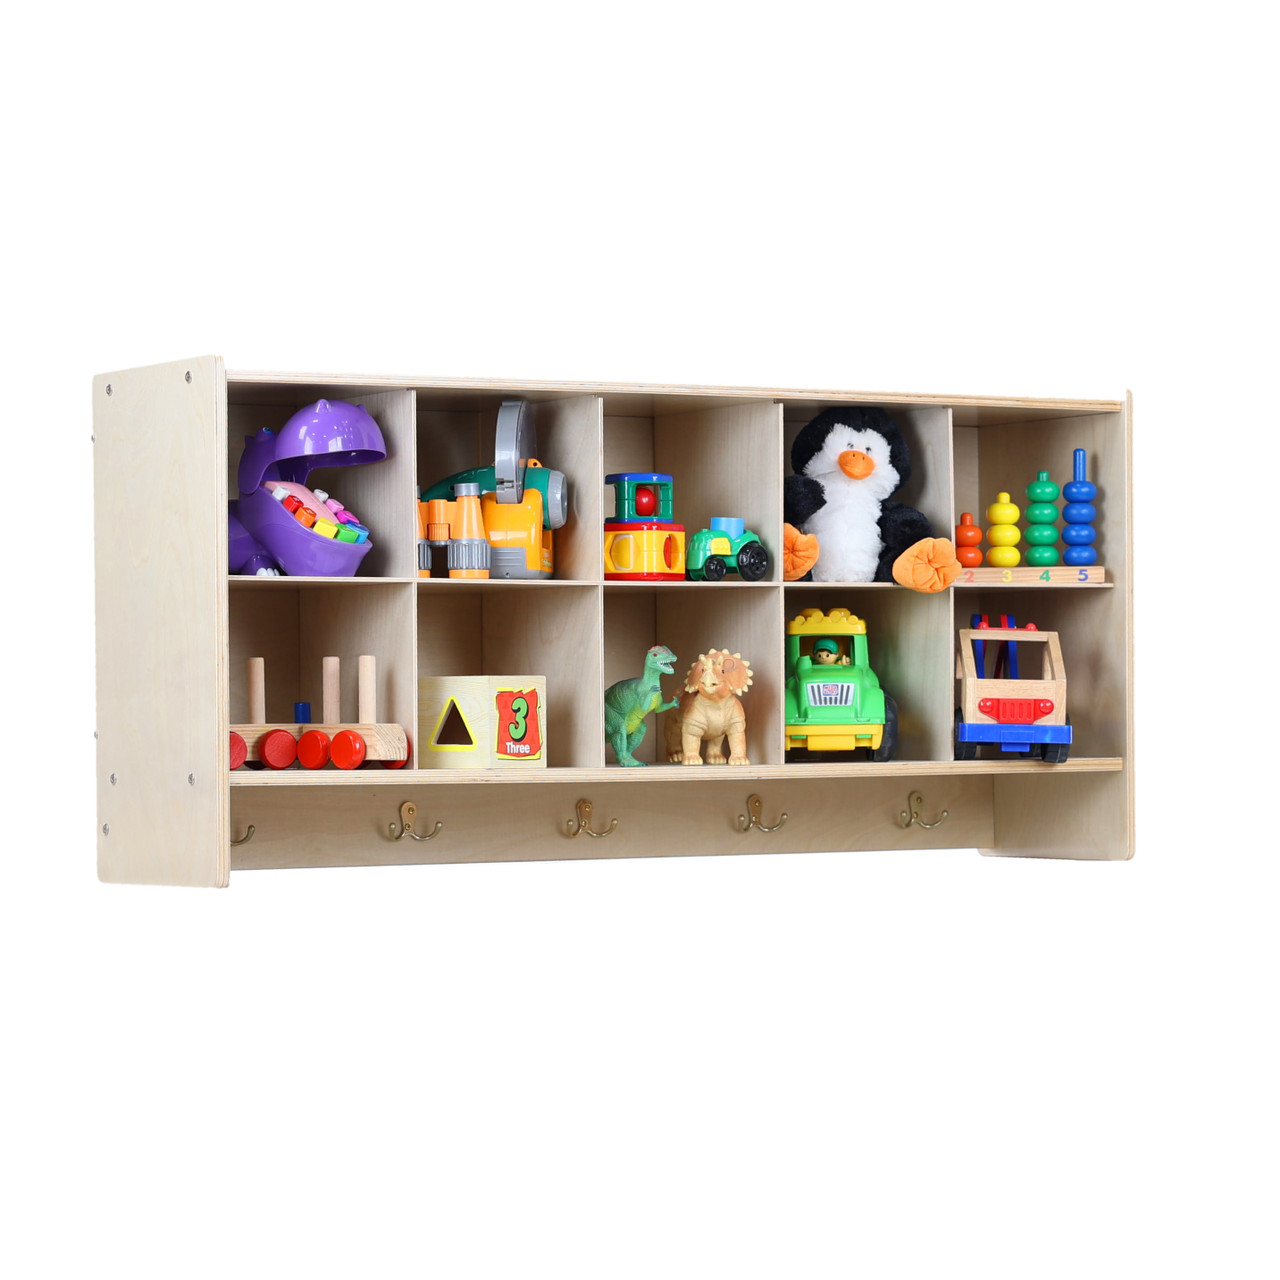 RRI Goods 10-Section Wall Mount Classroom Storage Cubby Organizer